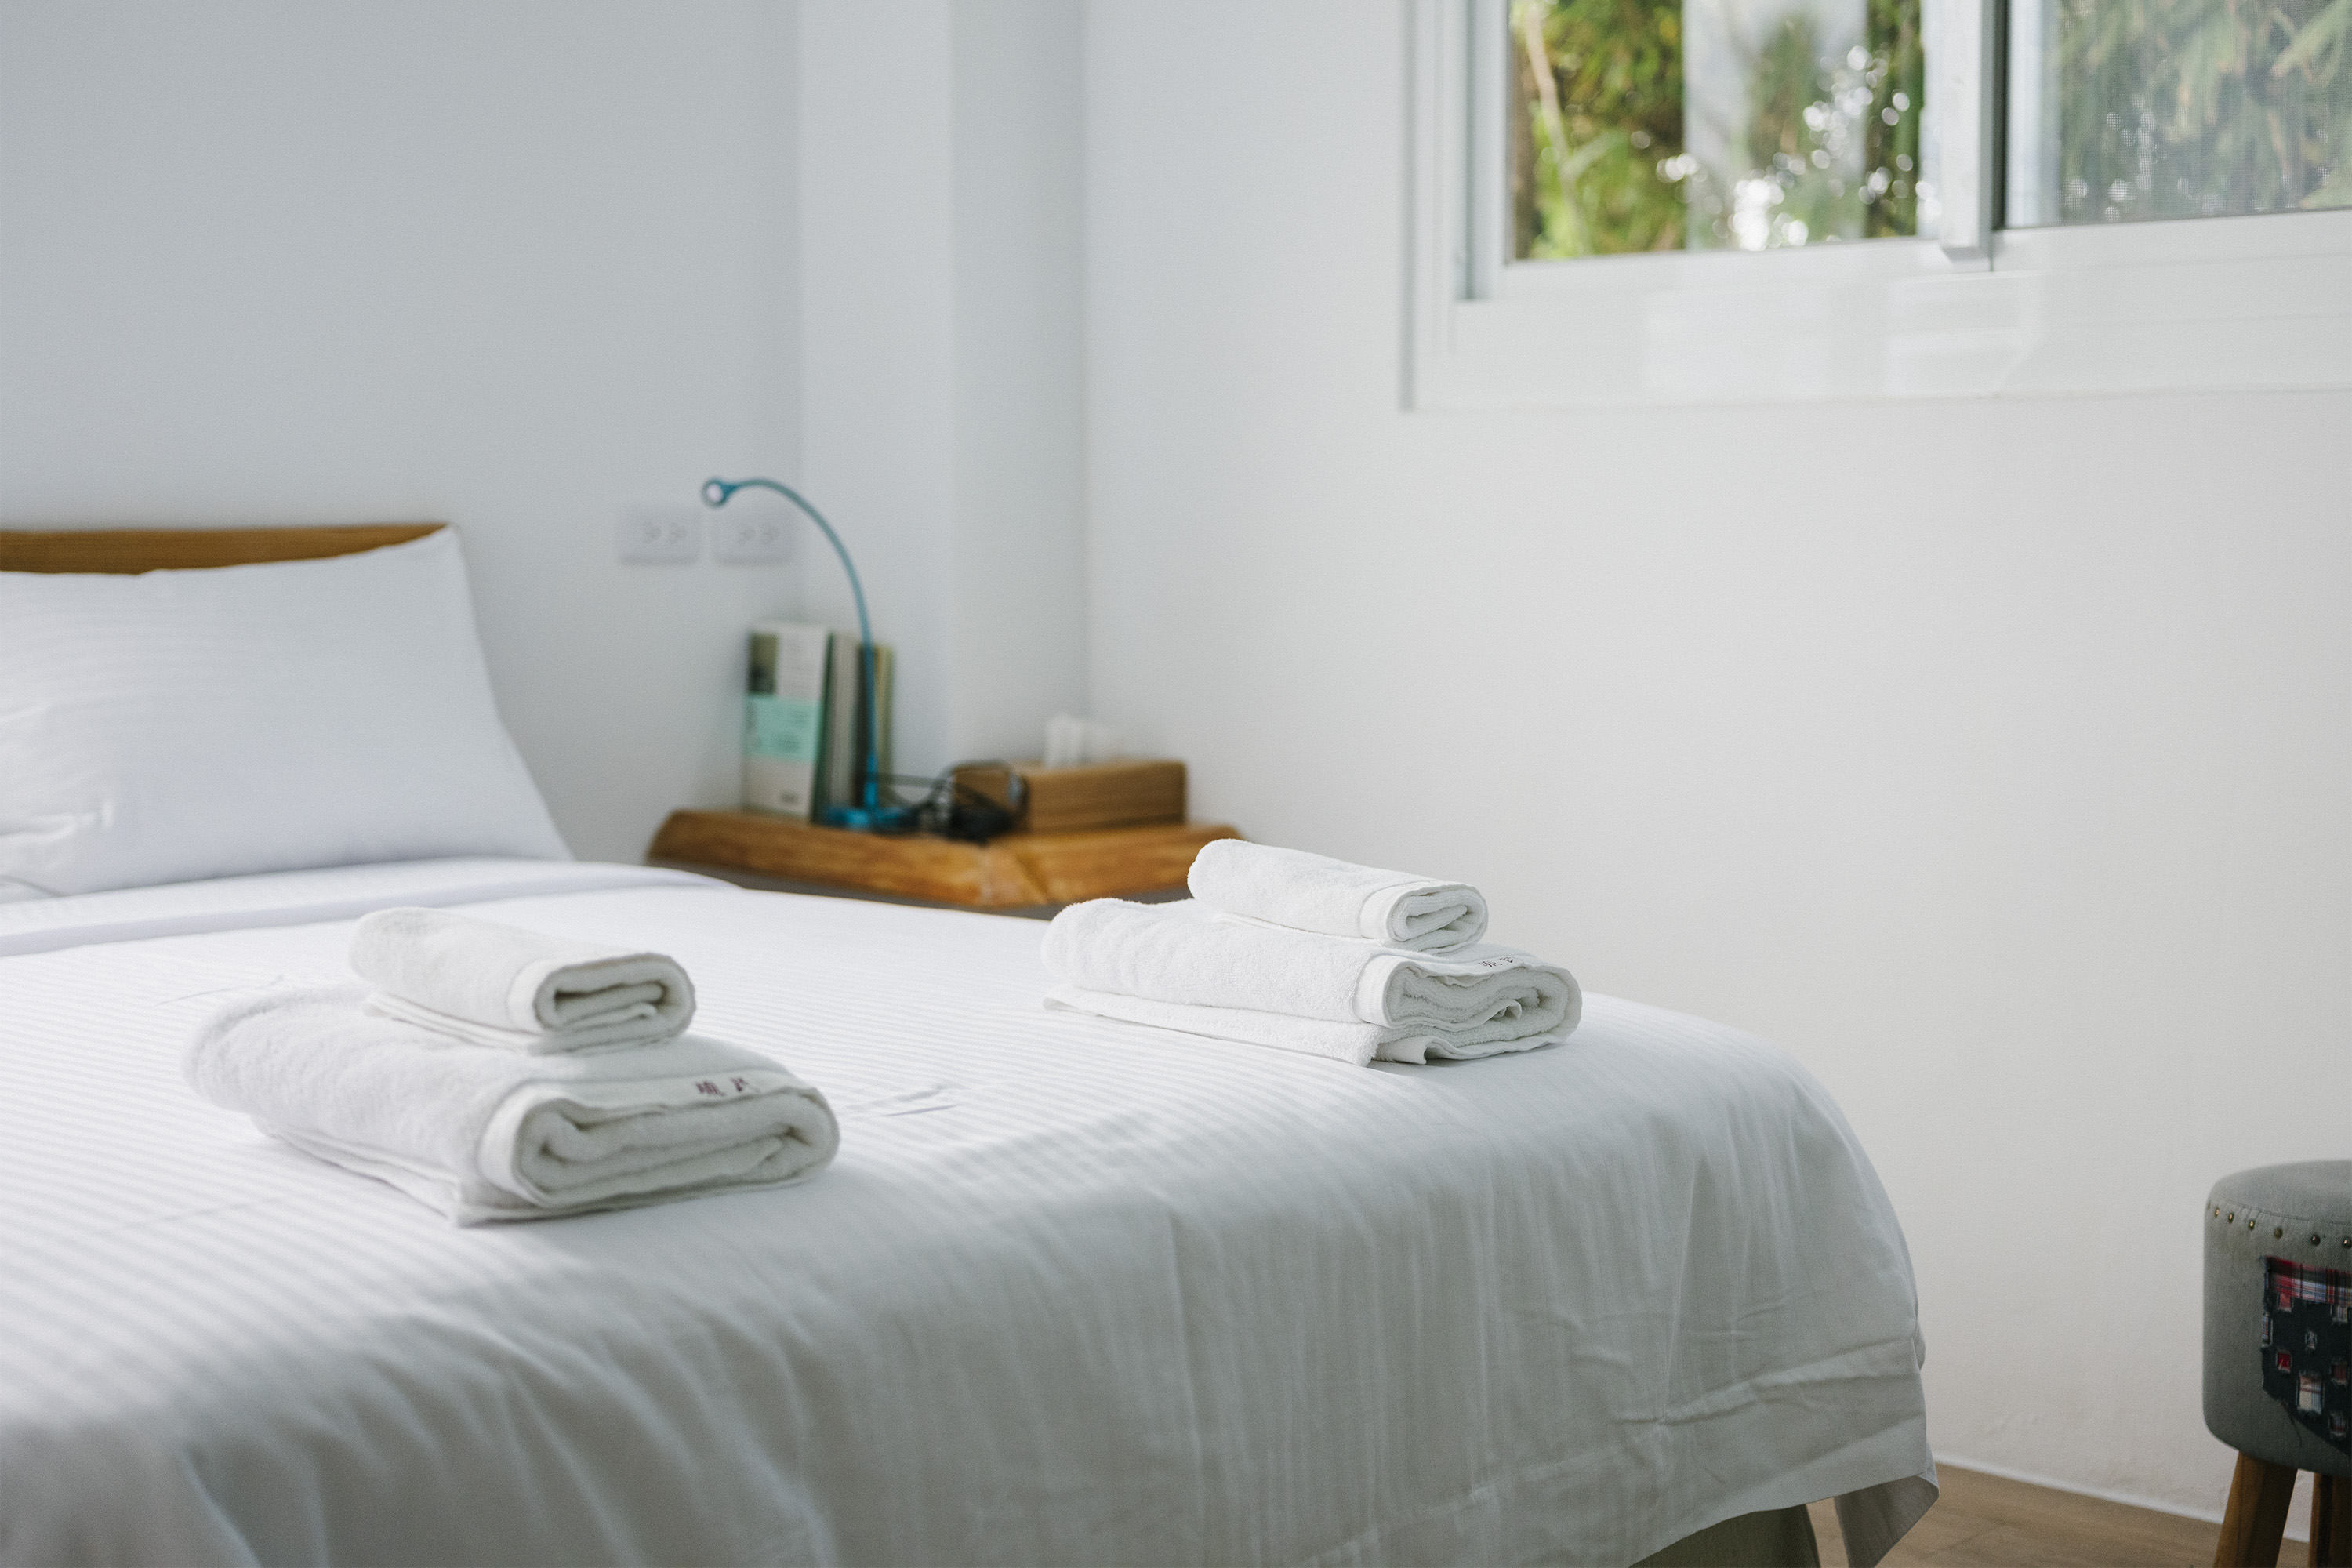 Two sets of clean towels rest at the end of a white bed in an Airbnb listing.